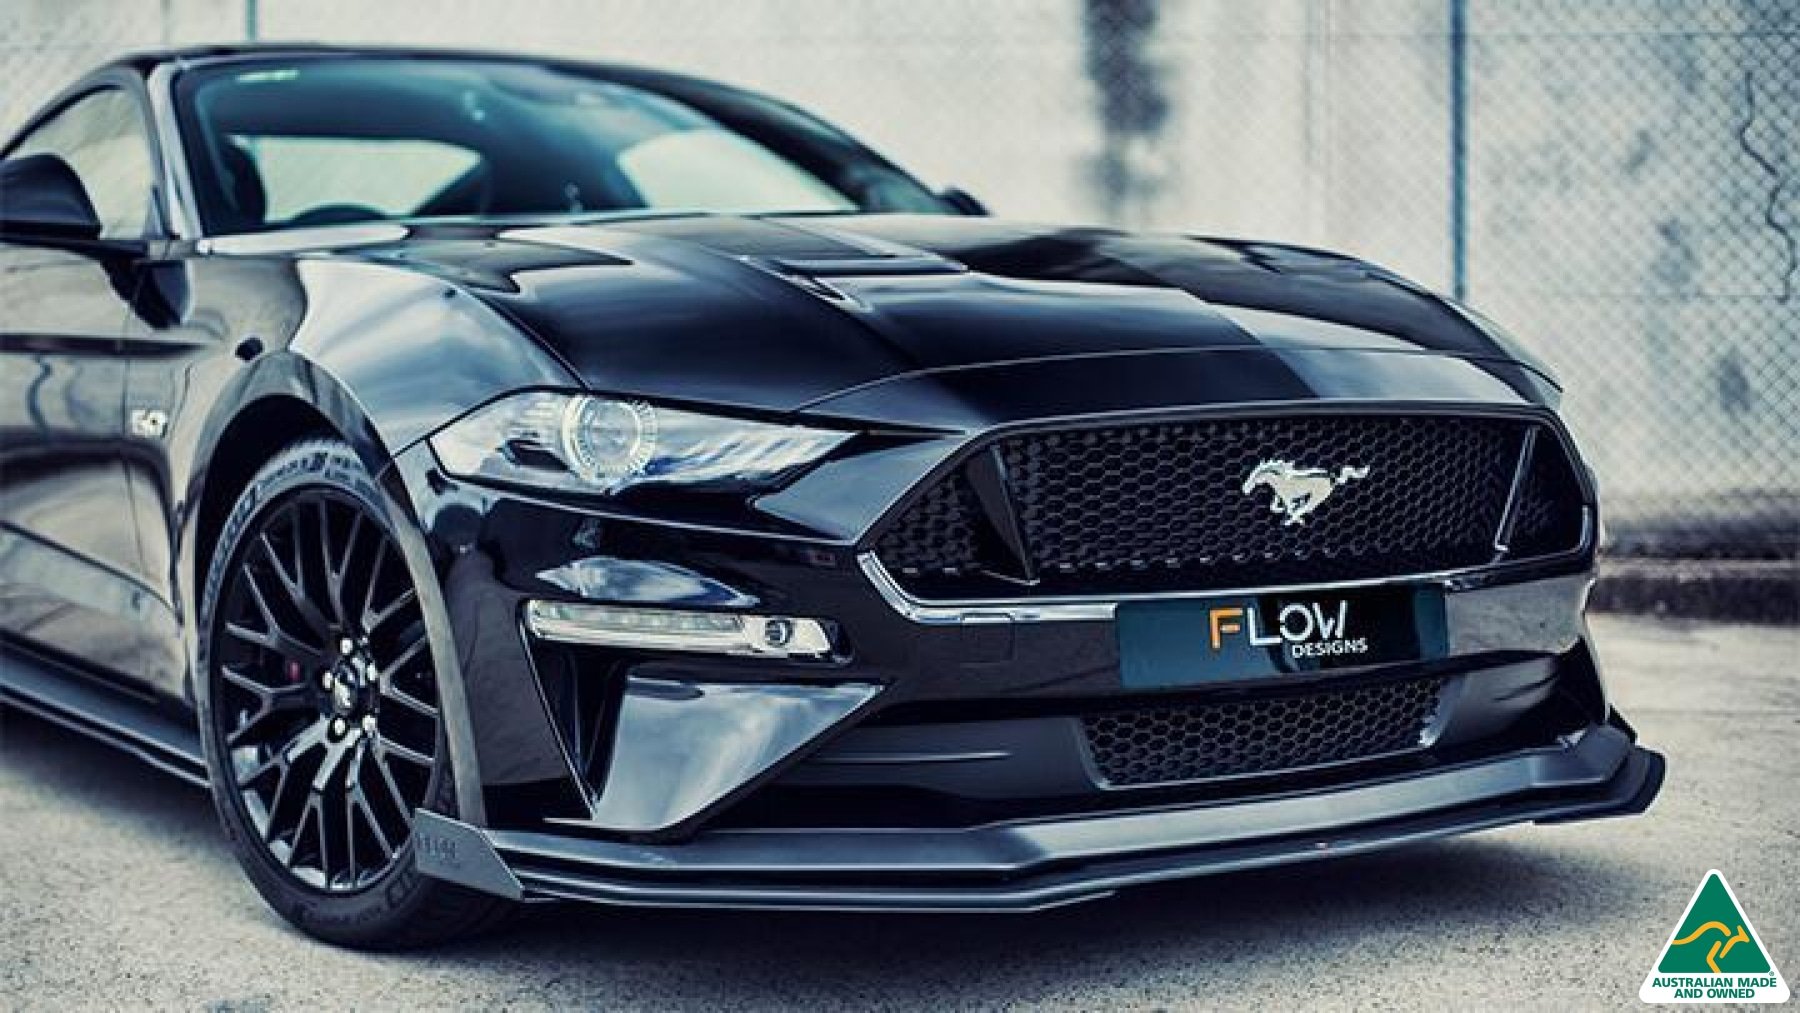 GT Mustang S550 FN Front Lip Splitter - MODE Auto Concepts